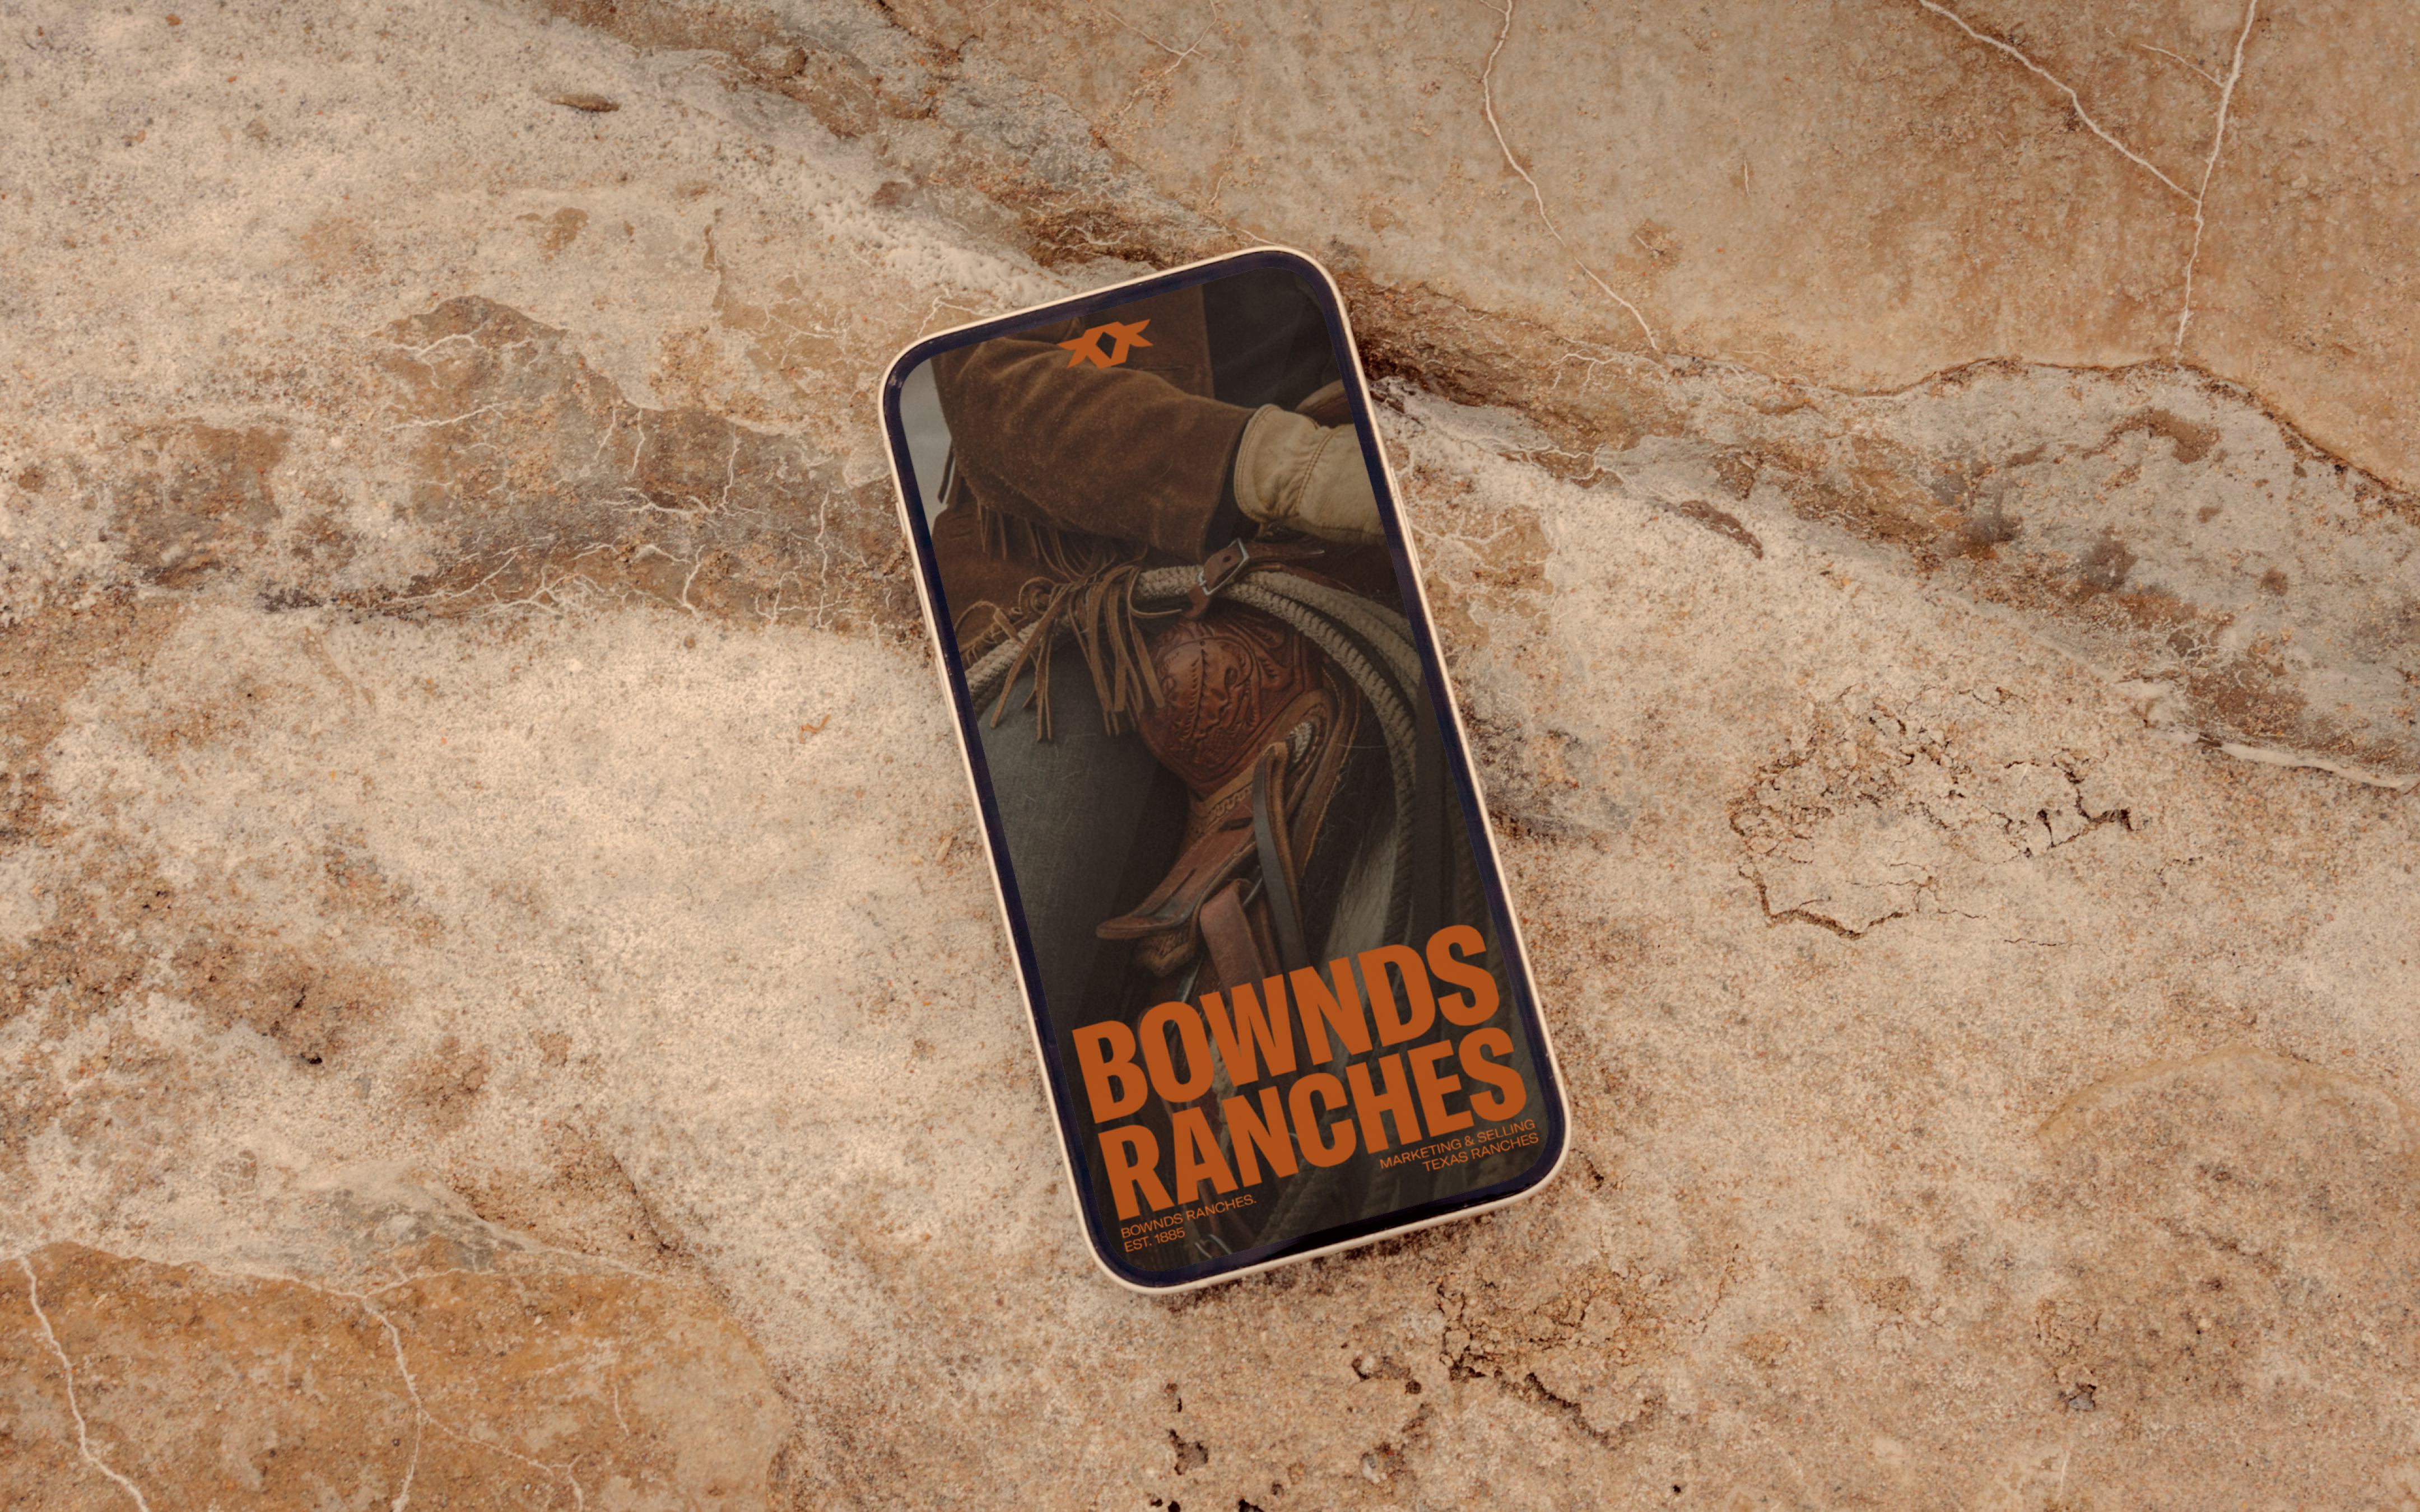 Bownds Ranches website on a mobile phone sitting on a sandstone background